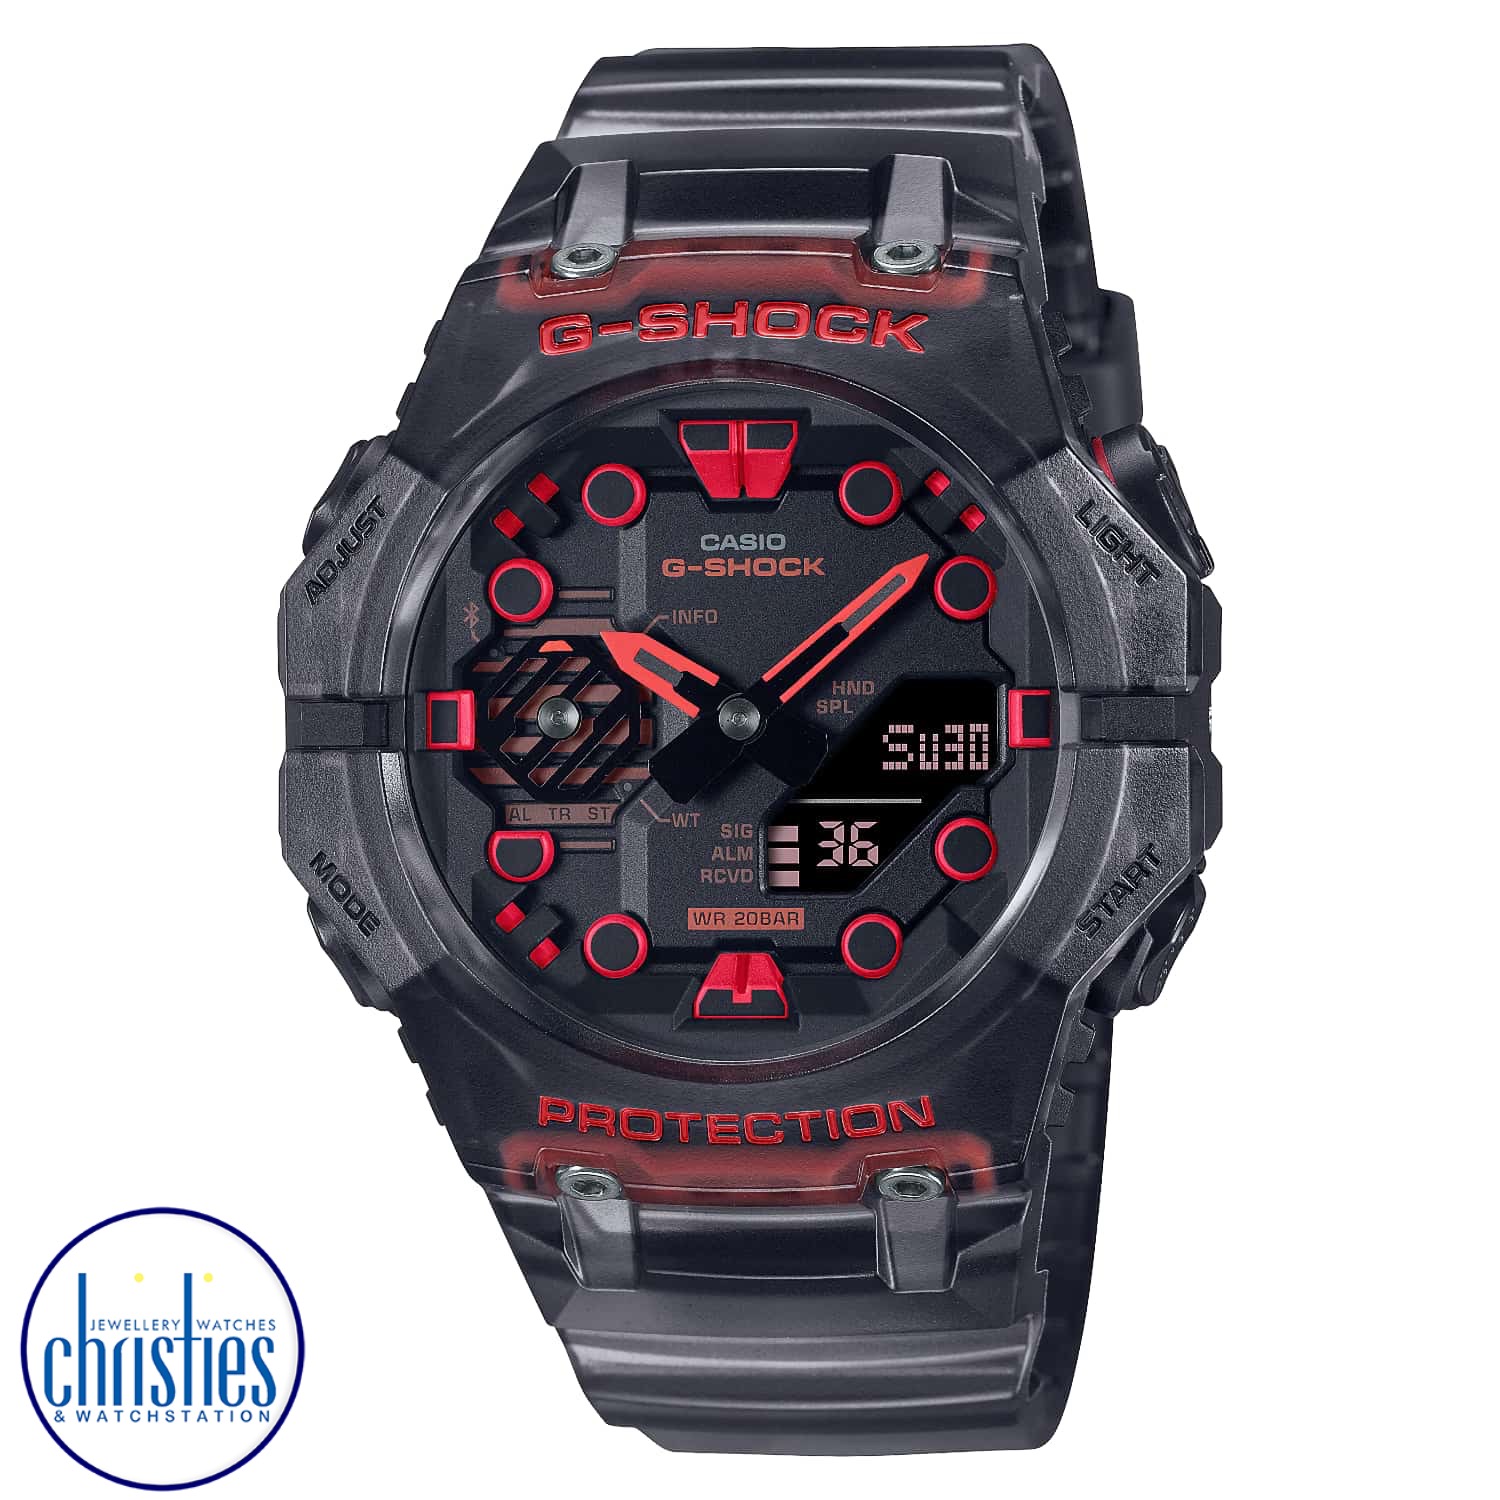 GAB001G-1A G-Shock Smartphone Link Watch. introducing the GA-B001 line of G-SHOCK watches — Featuring a new toughness-driven design and Smartphone Link functionality. g shock watches price